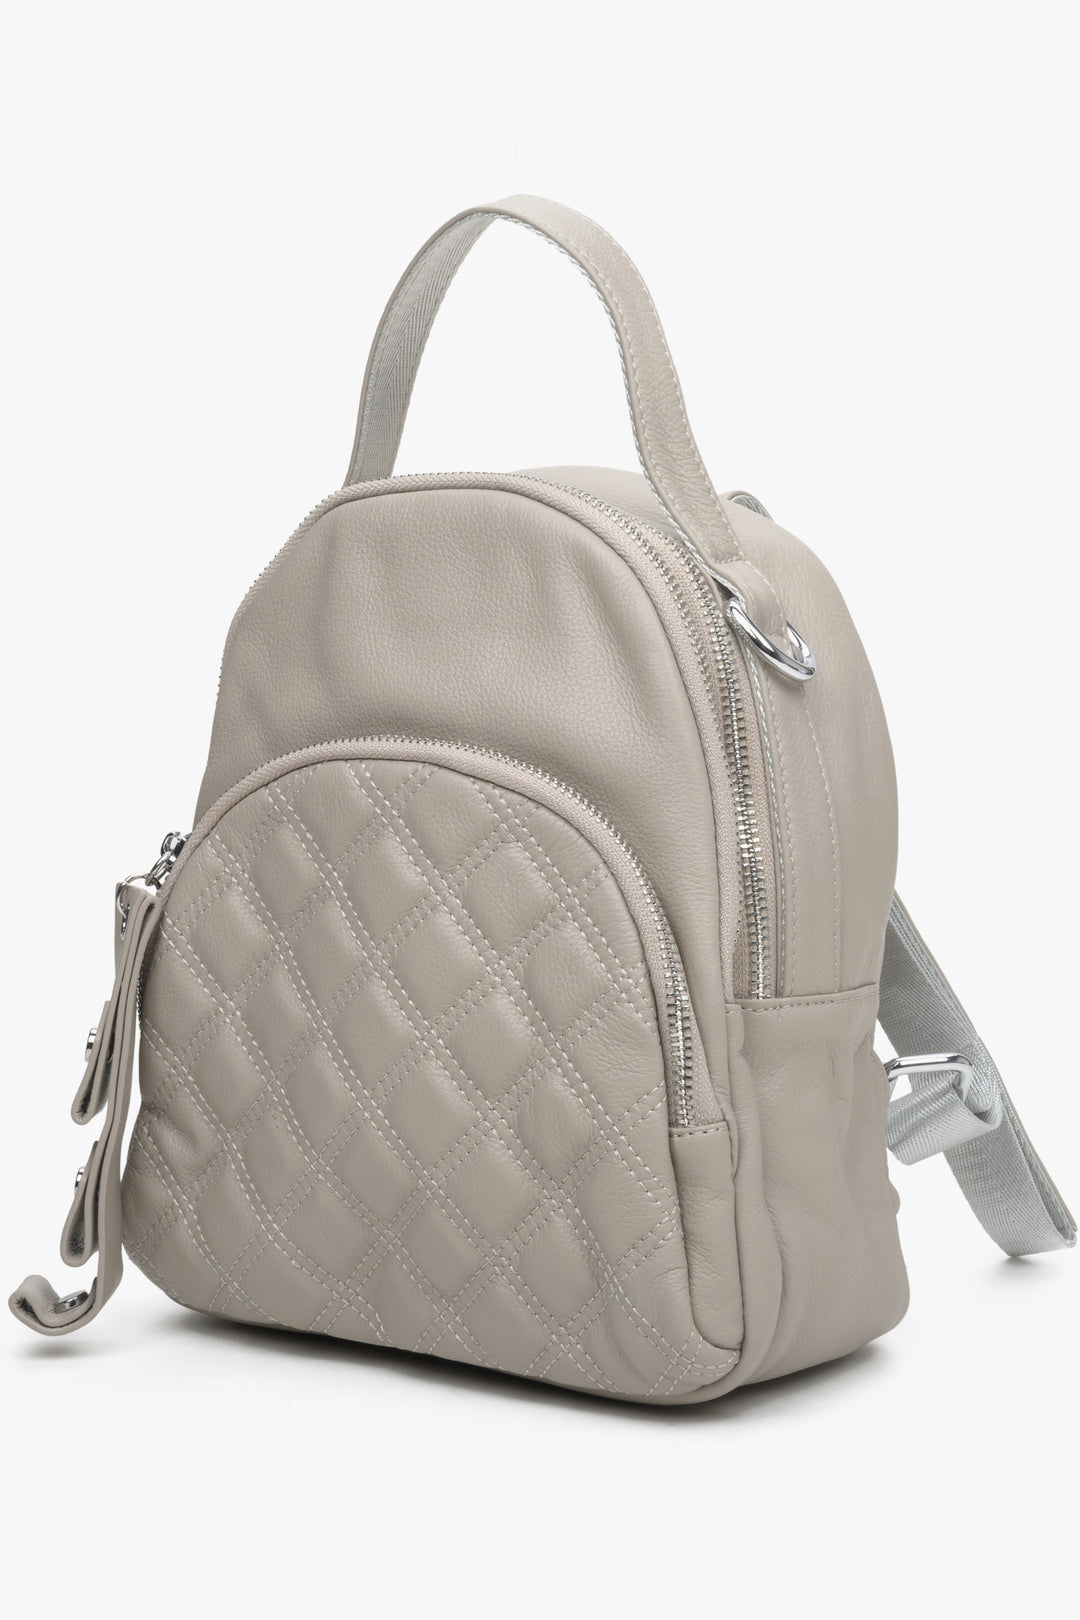 Small, urban women's beige backpack by Estro - front view of the model.